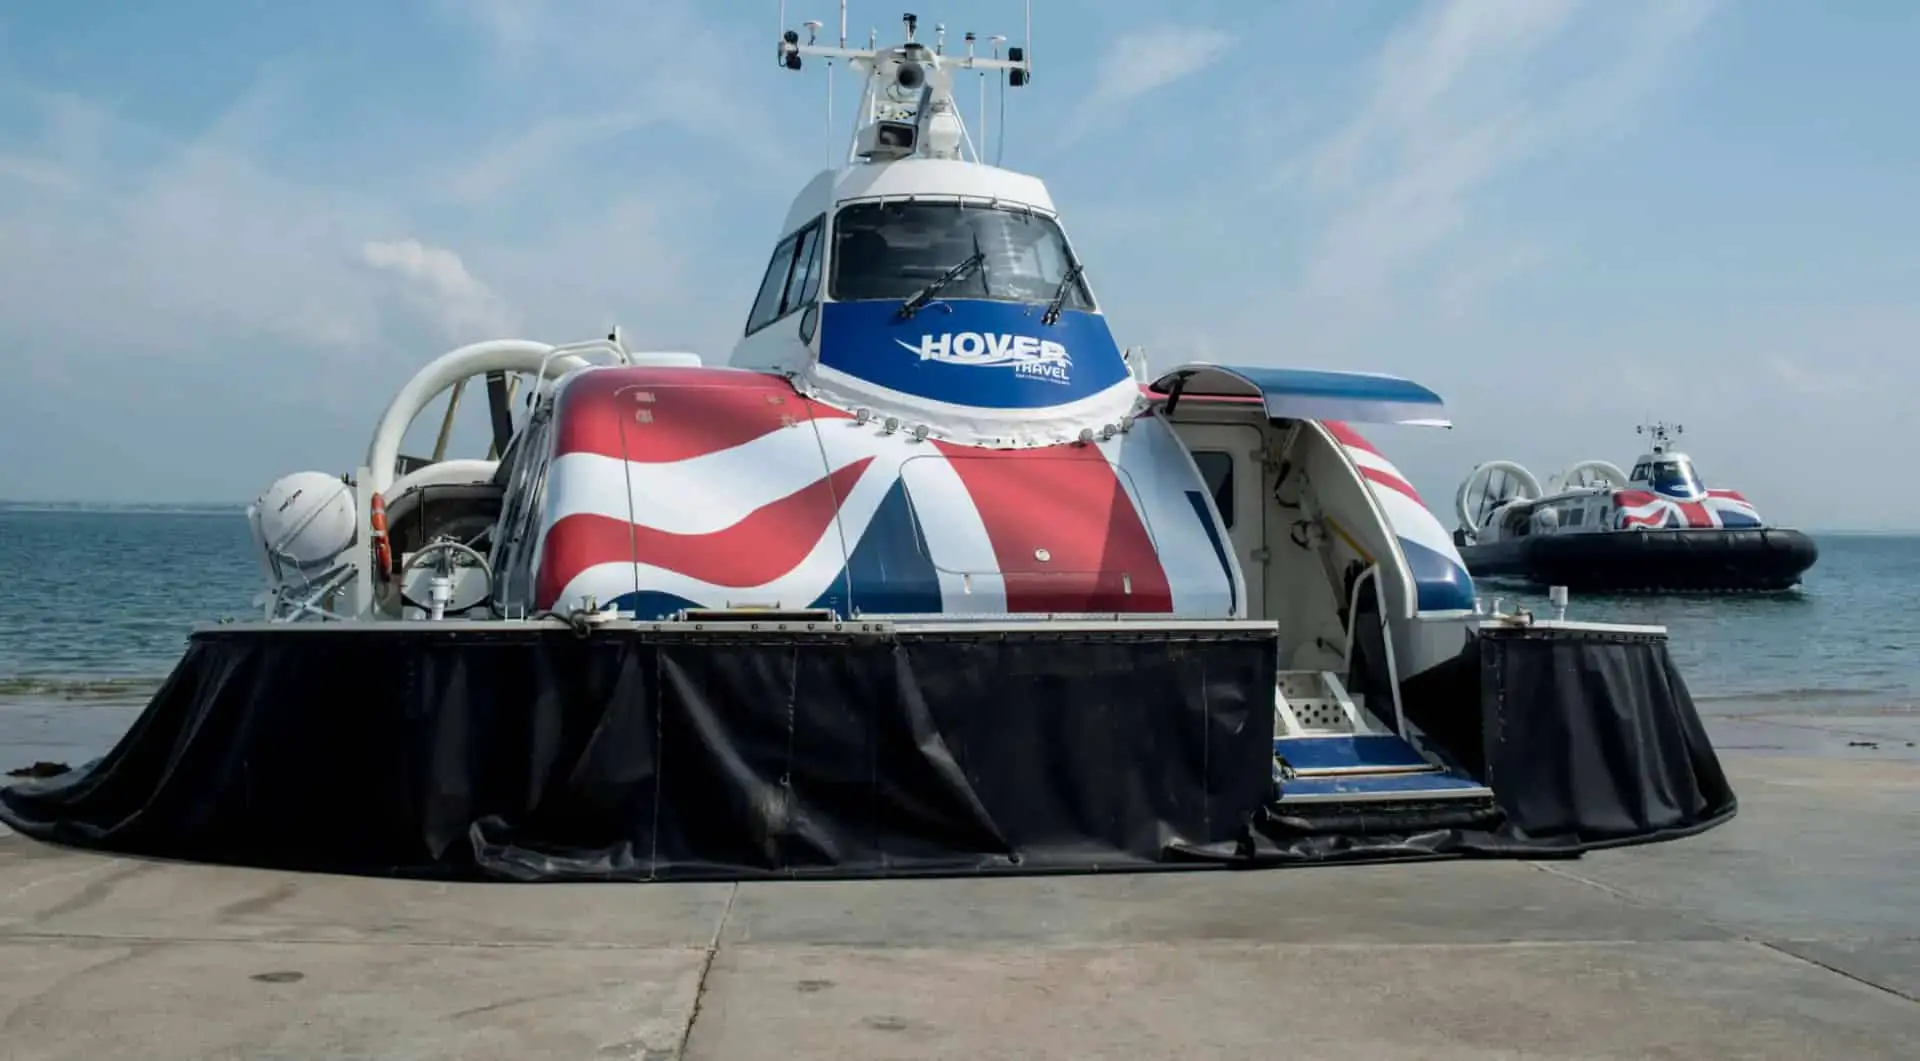 Two Hovertravel craft at Ryde